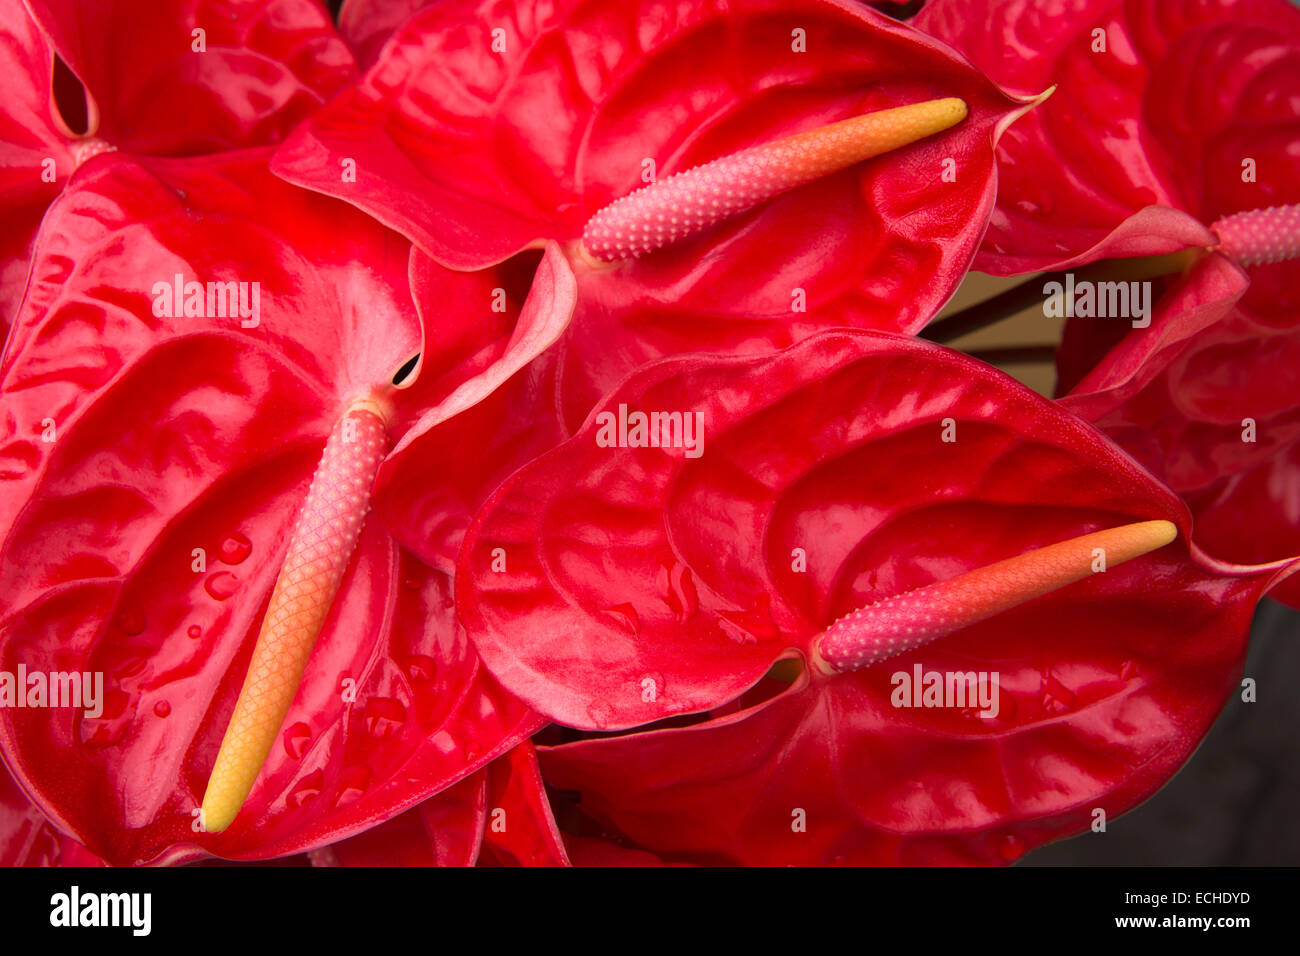 Mauritius, Mahebourg, red anthurium flowers displayed outside florist’s shop Stock Photo